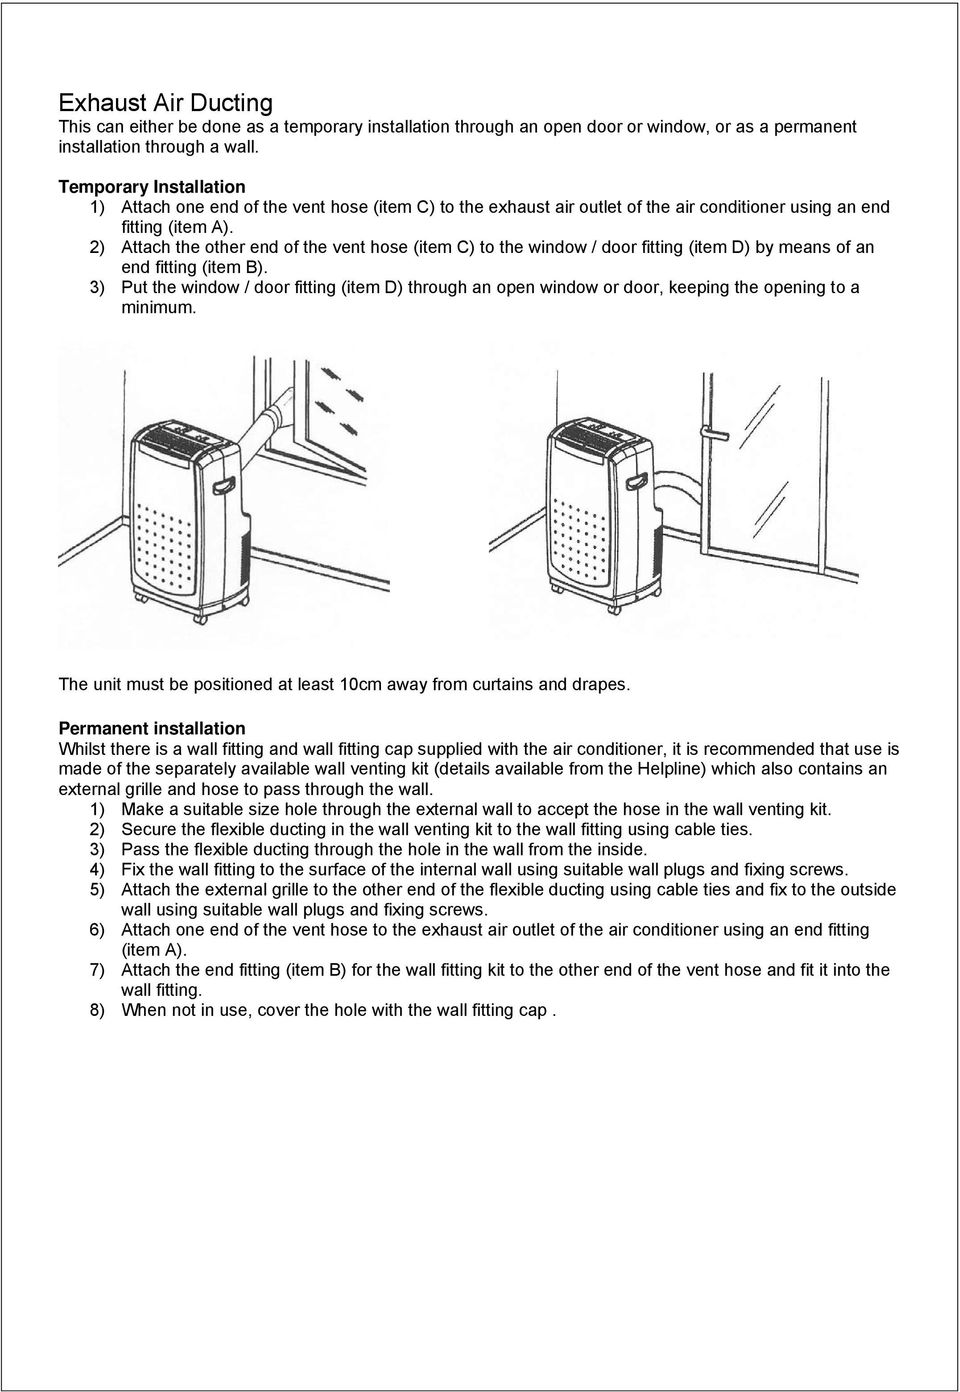 2) Attach the other end of the vent hose (item C) to the window / door fitting (item D) by means of an end fitting (item B).